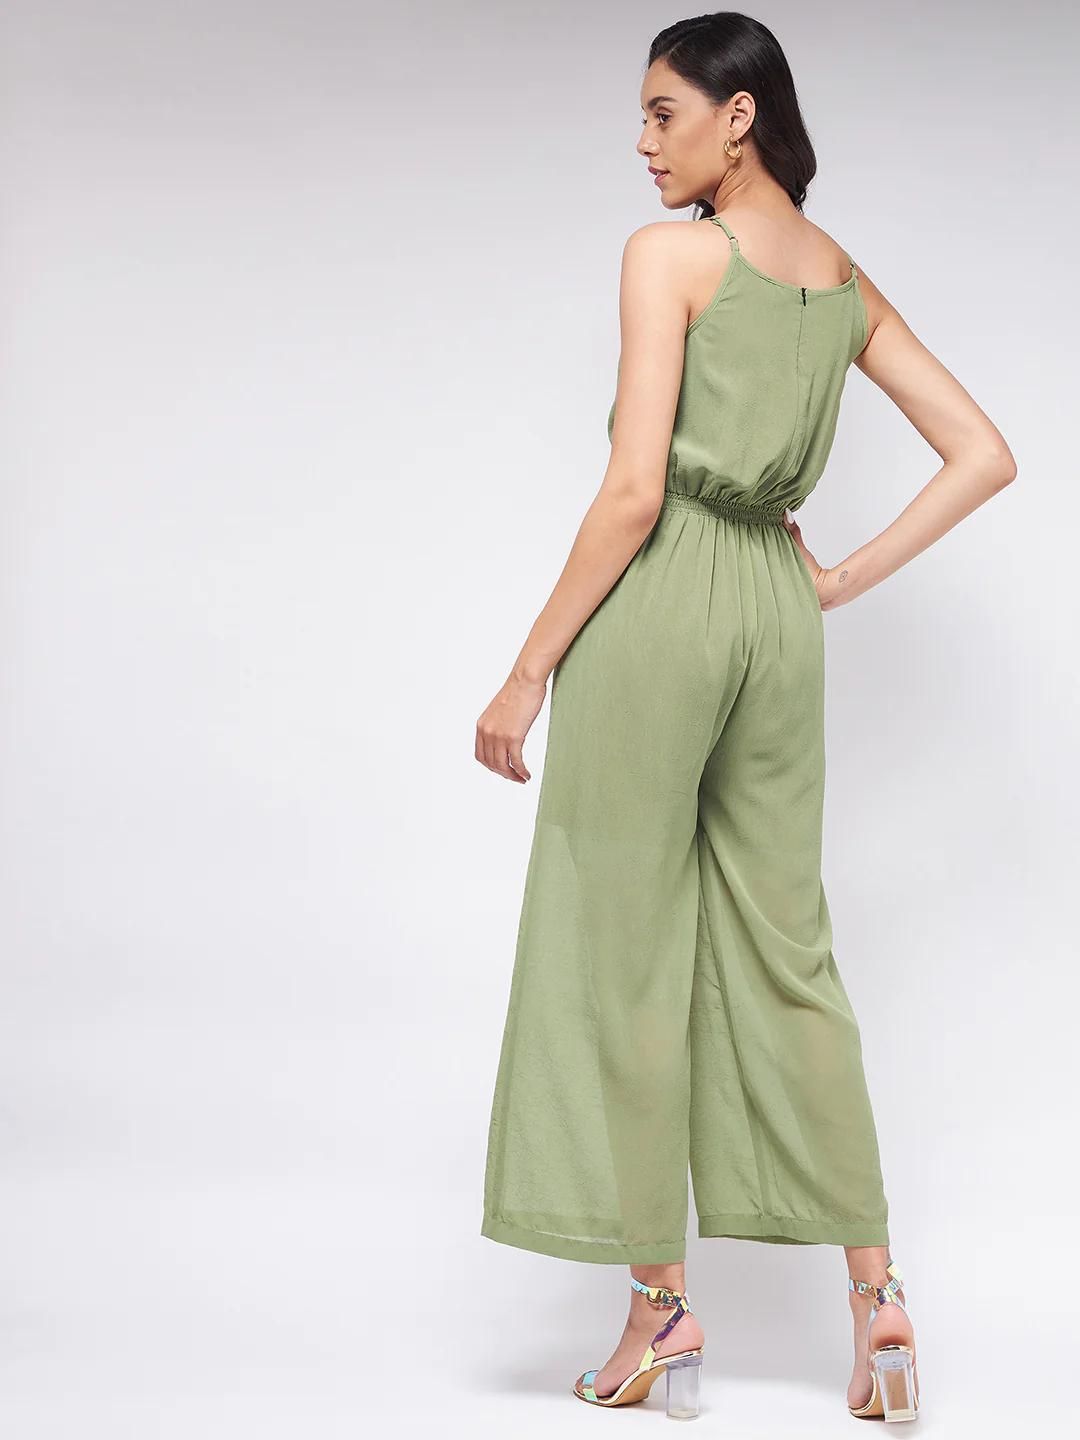 PANNKH Flaunt Yourself With Solid Green Cowl Neckline Jumpsuit